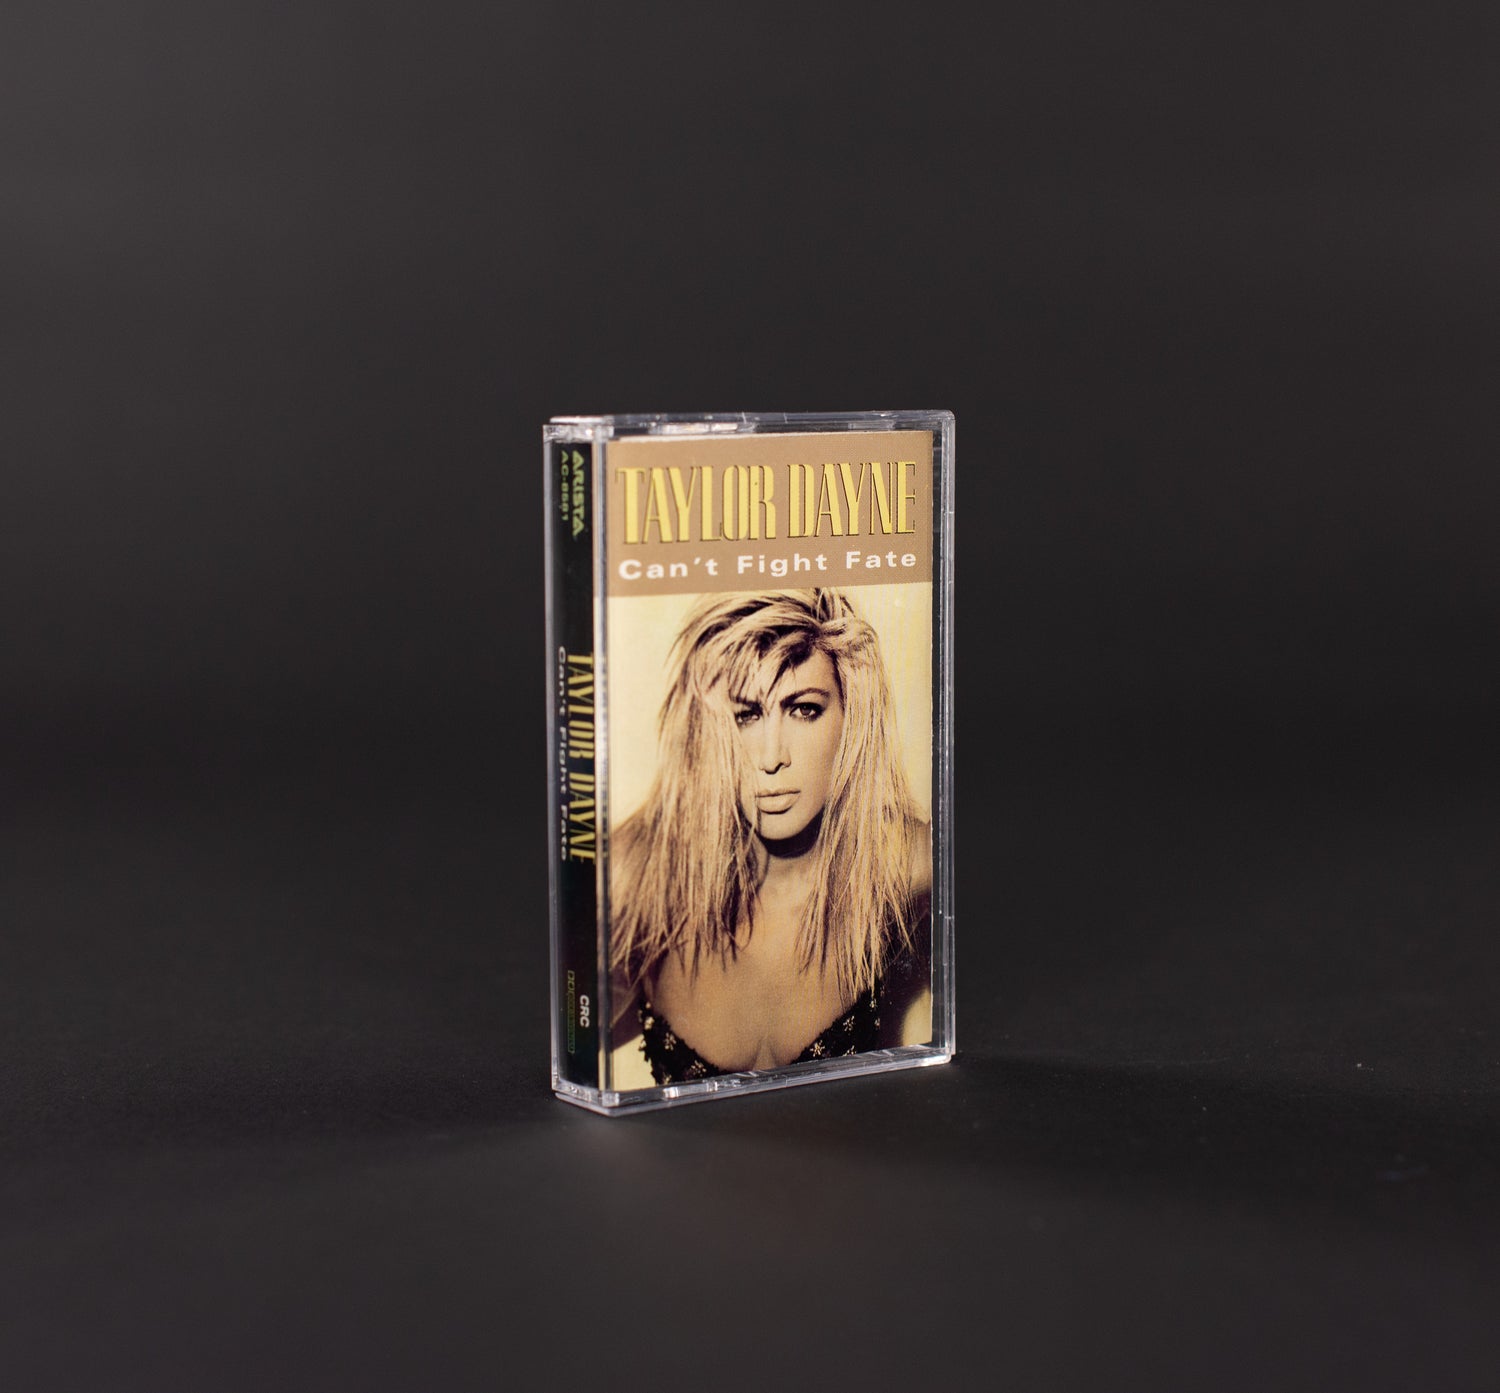 Can't Fight Fate (Vintage Cassette)